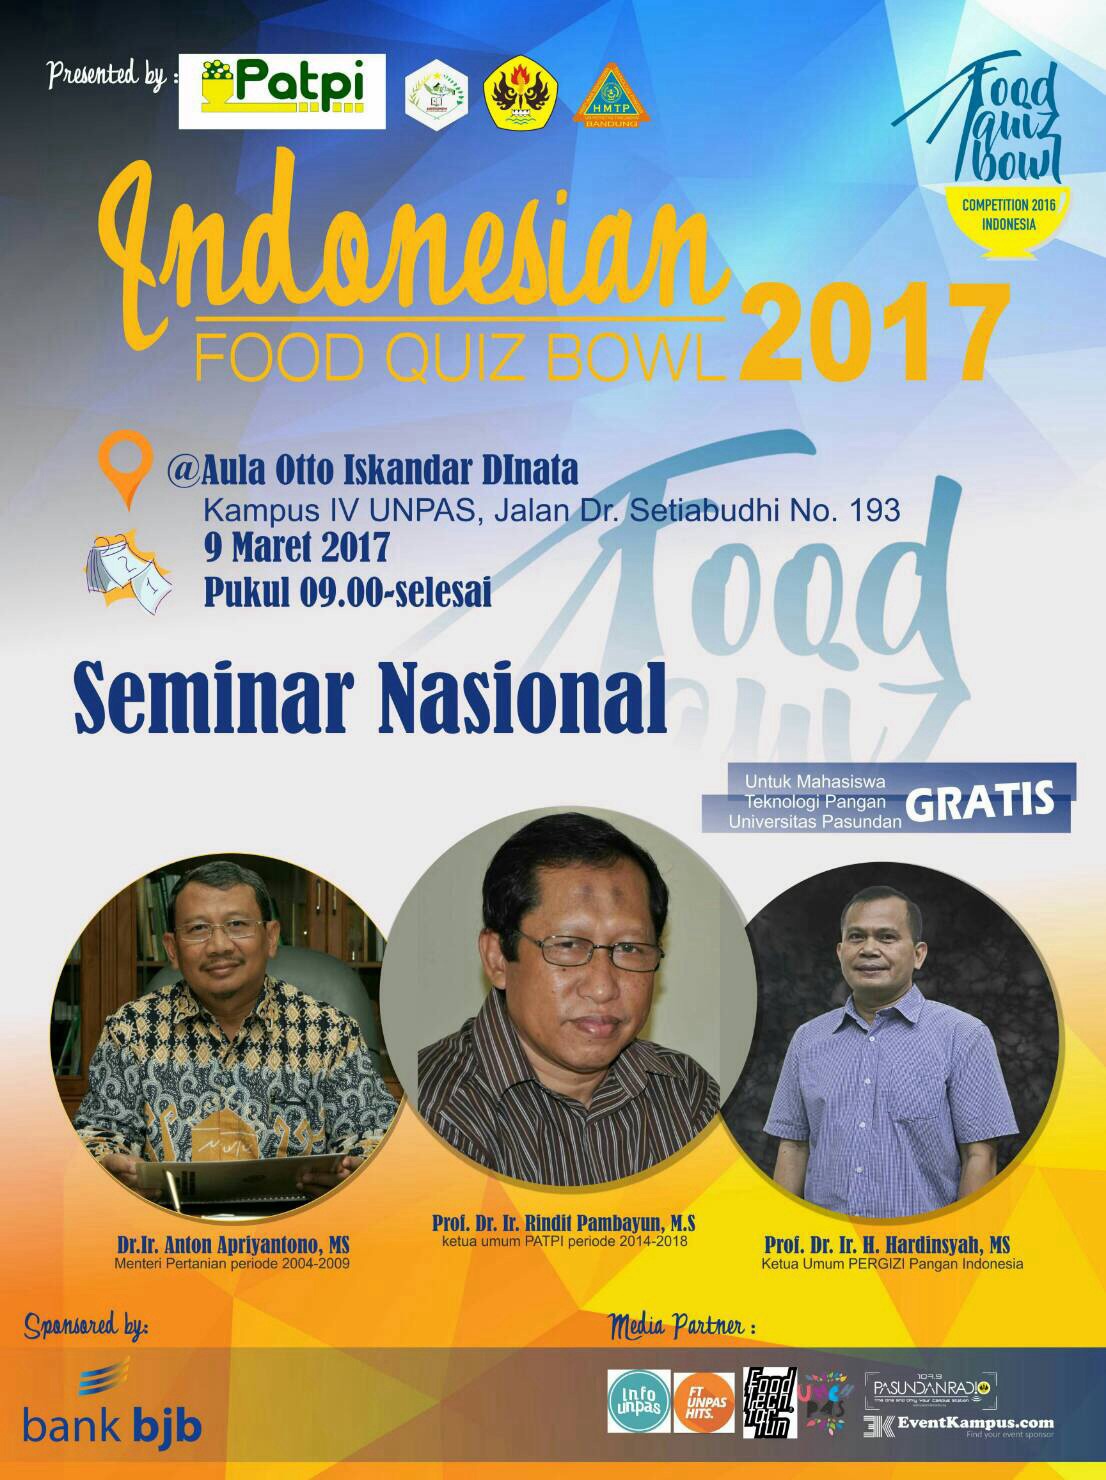 Poster Seminar Nasional Indonesian Food Quiz Bowl Competition 2017 (IFQB)